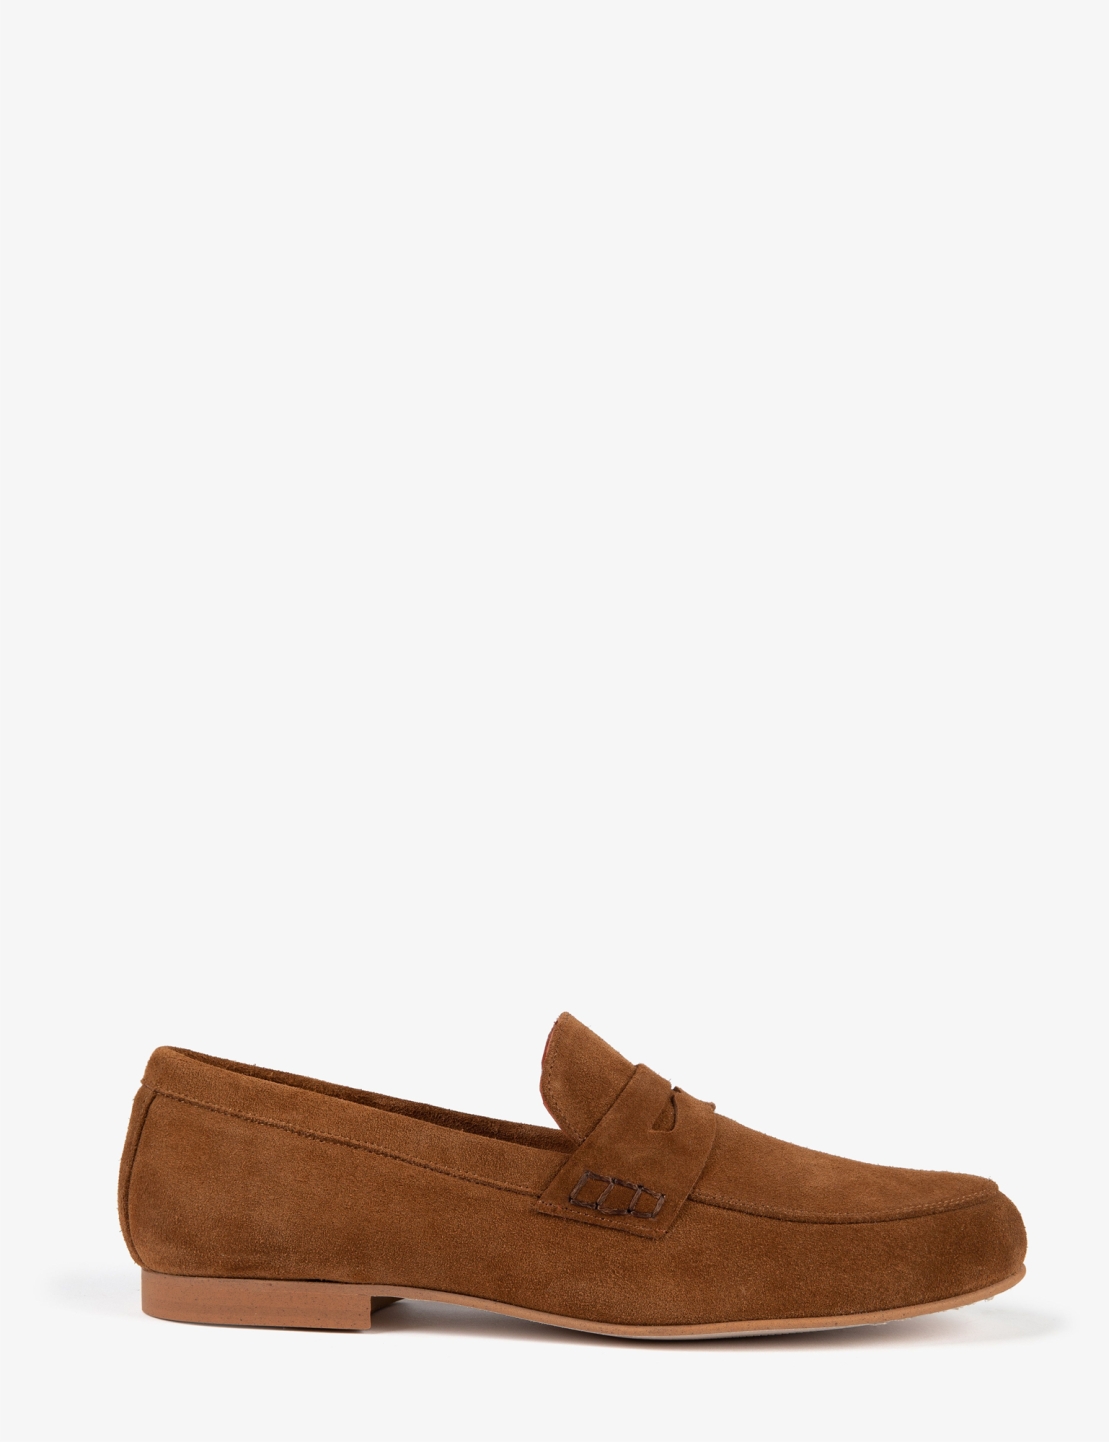 Bonnie Suede Loafer - Tan | Women's Shoes | Penelope Chilvers